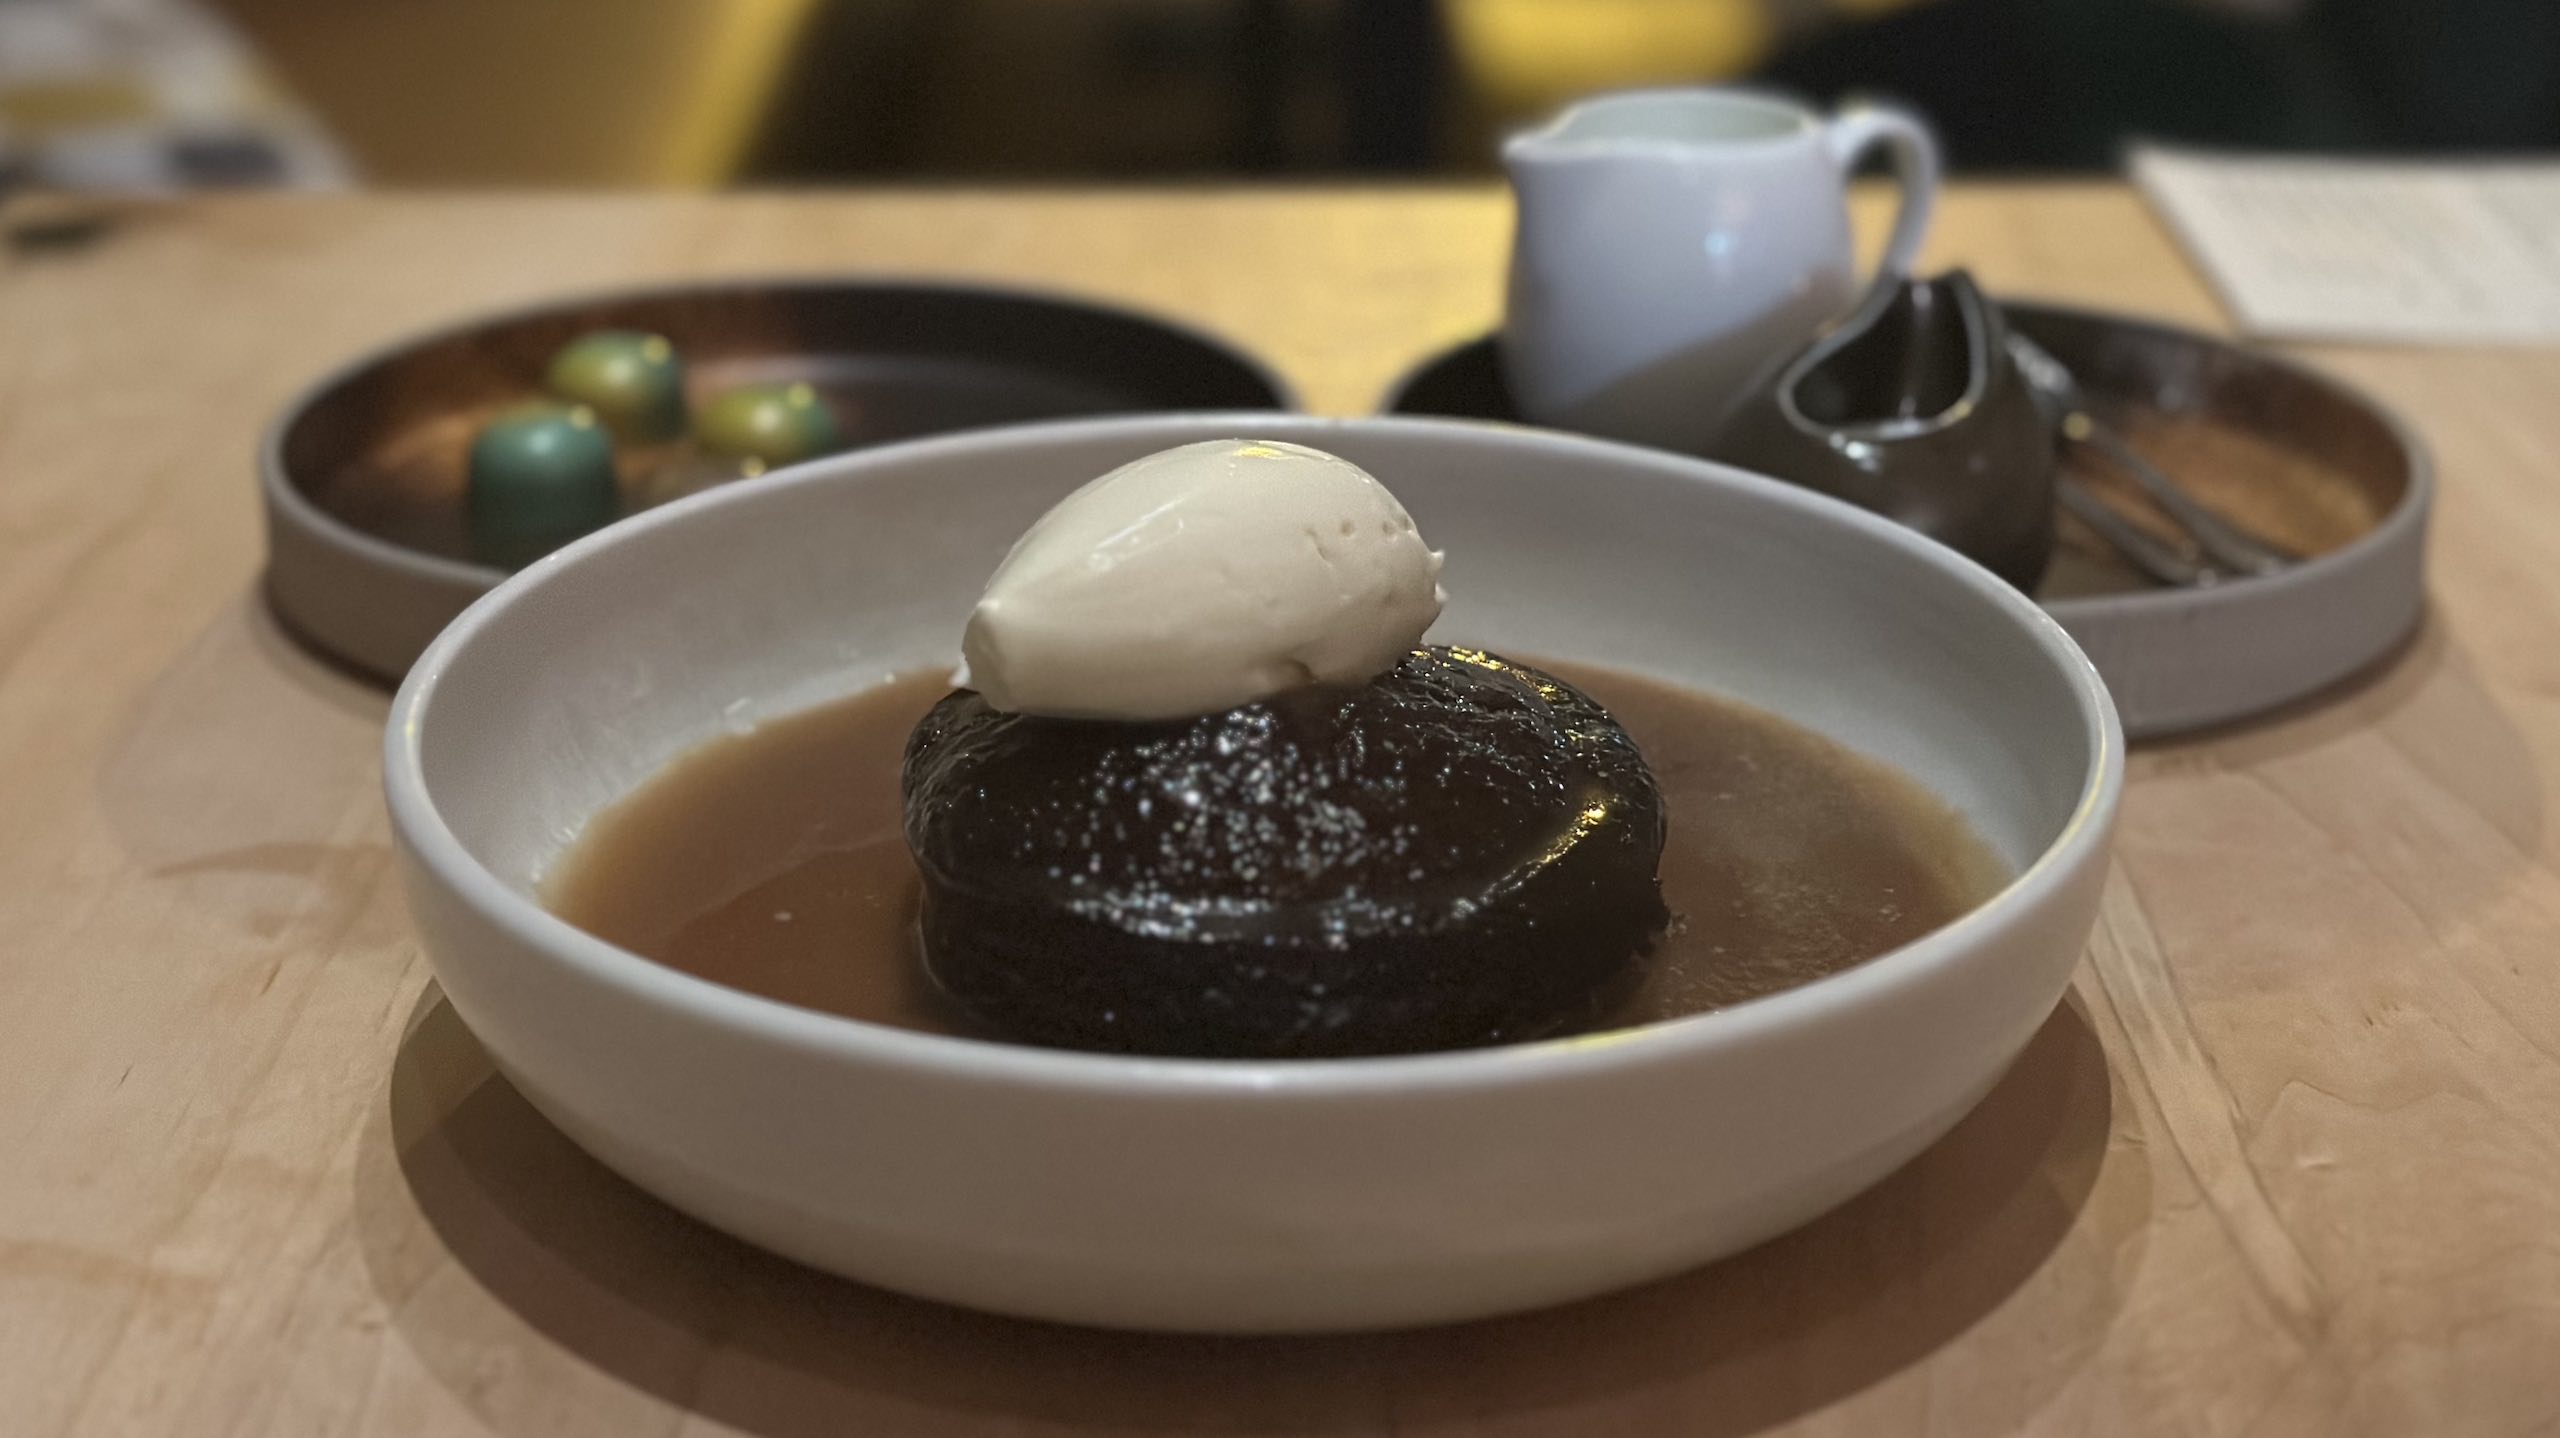 The Common Stove Sticky Toffee Pudding